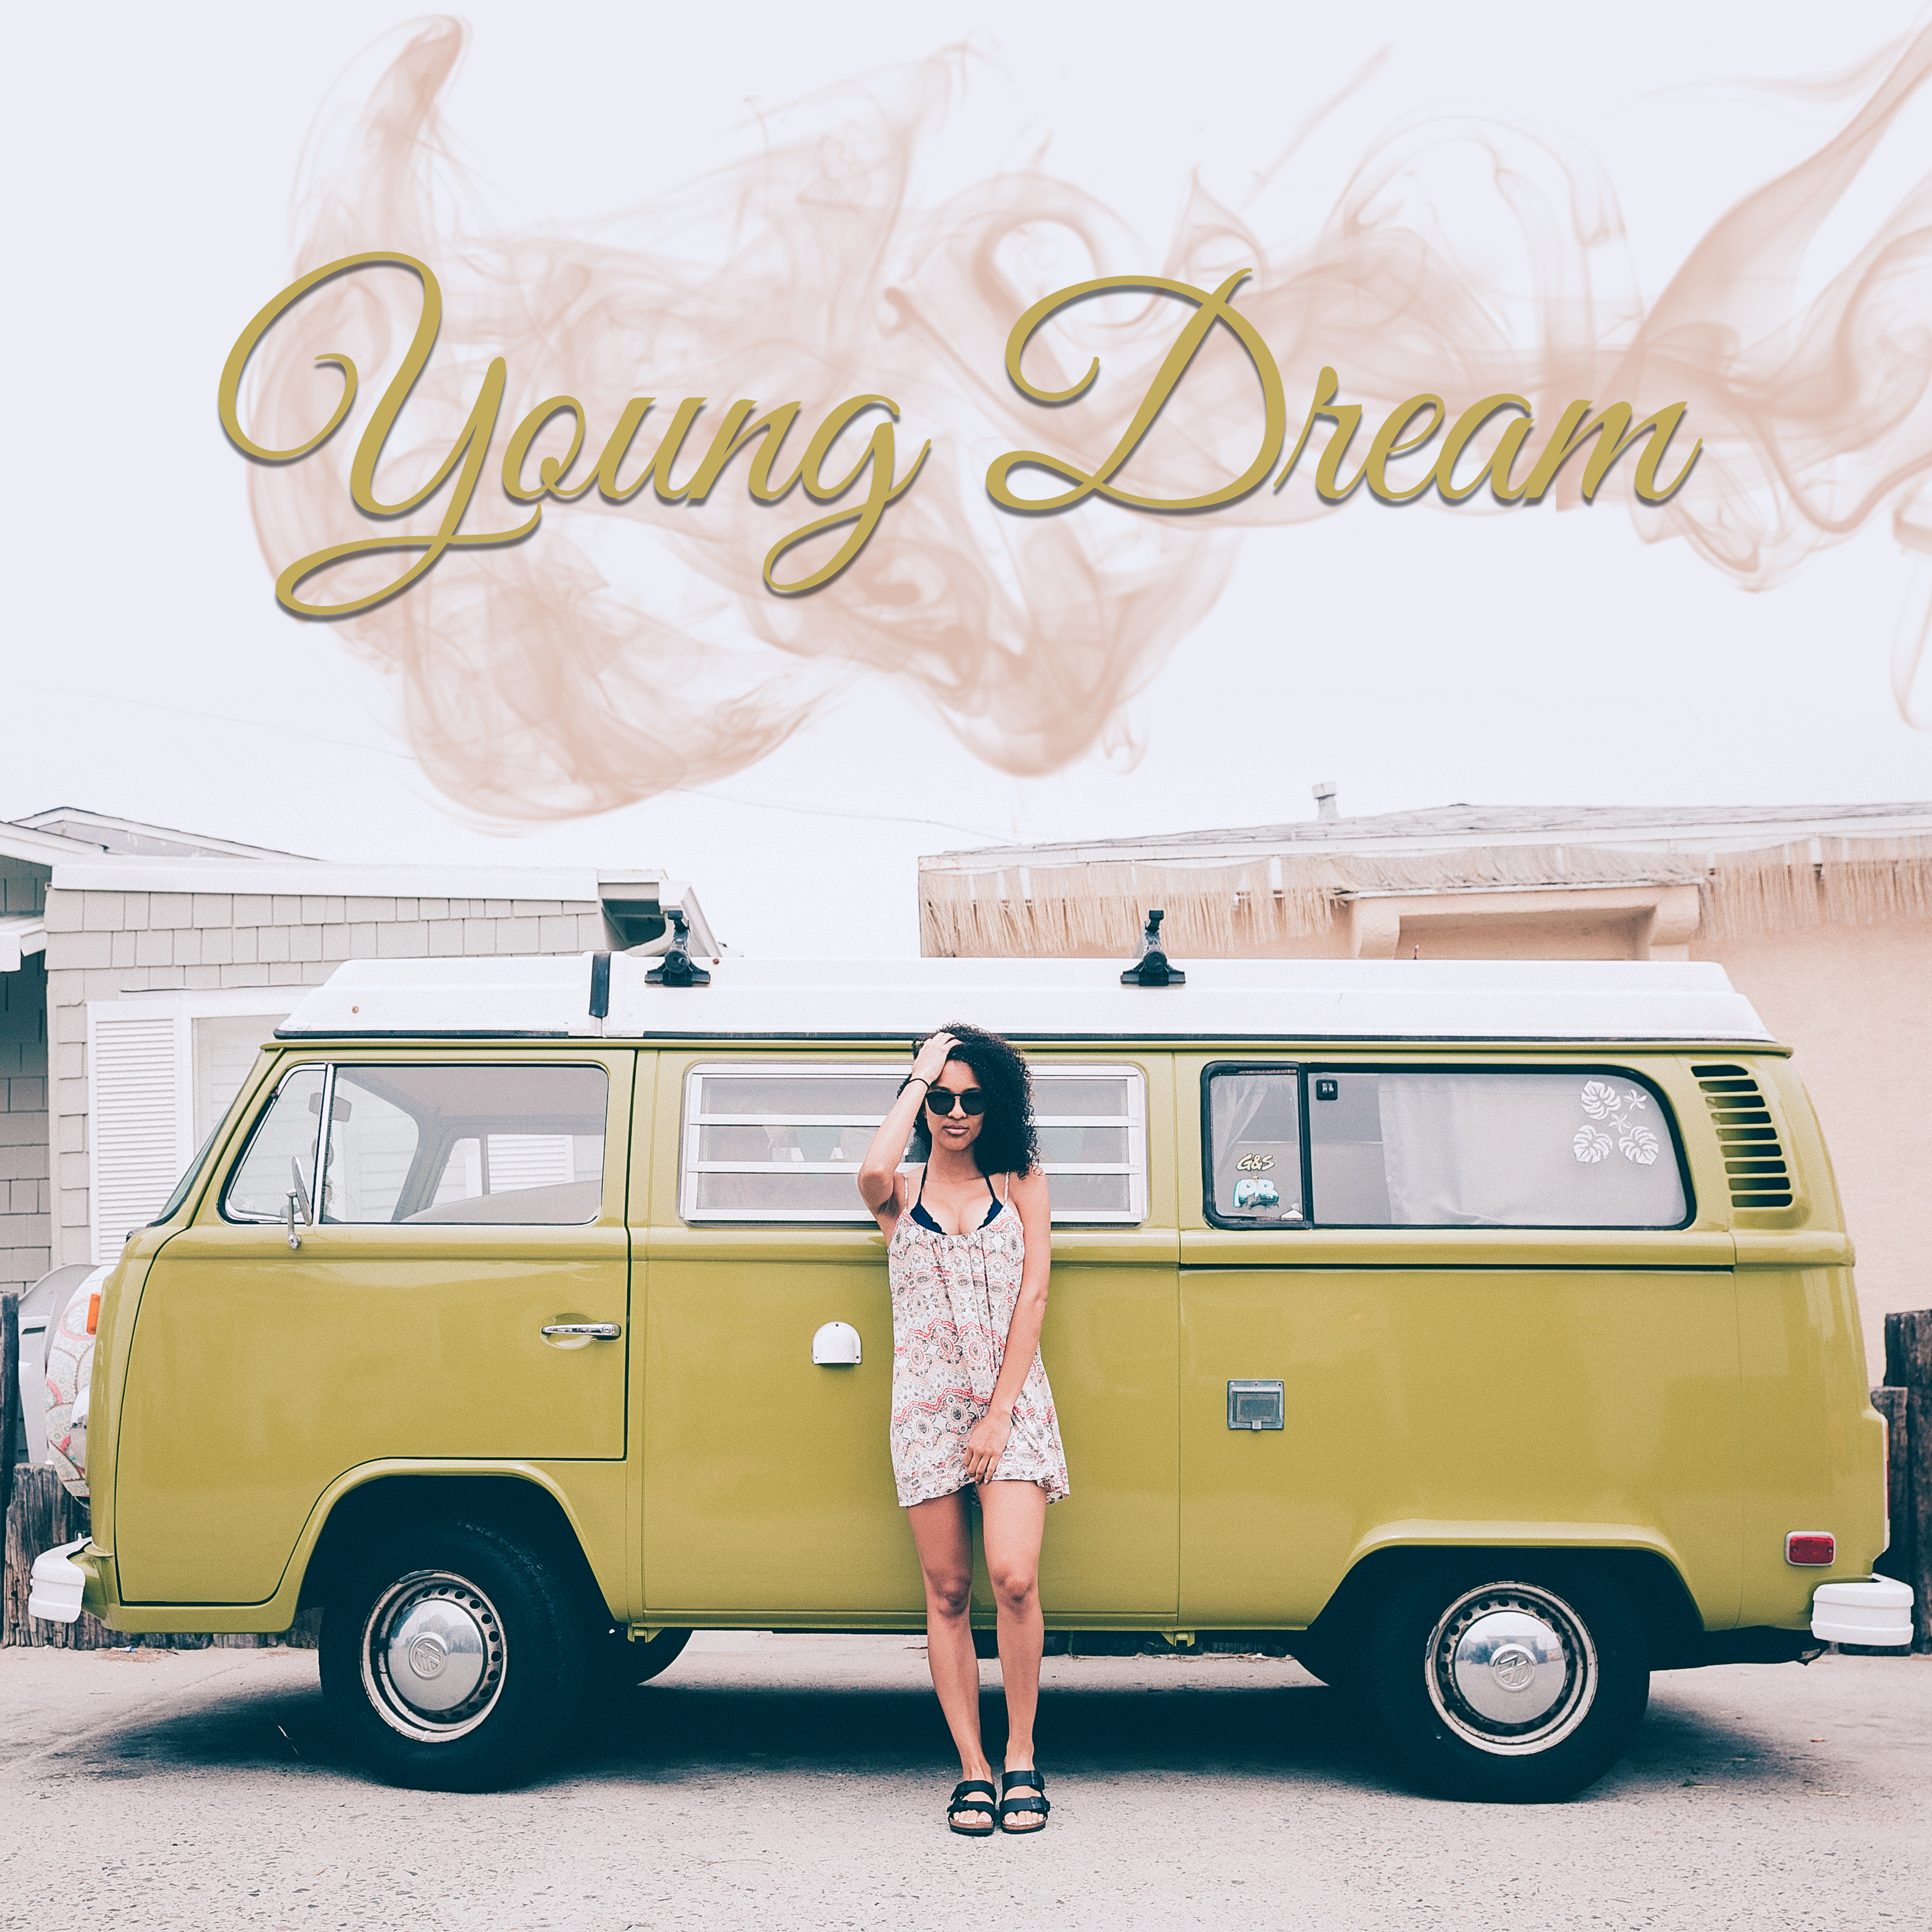 Young Dream - Free Chillout, Ibiza Chillout Music, Ibiza Lounge, Weekend Music, Friday Party Music